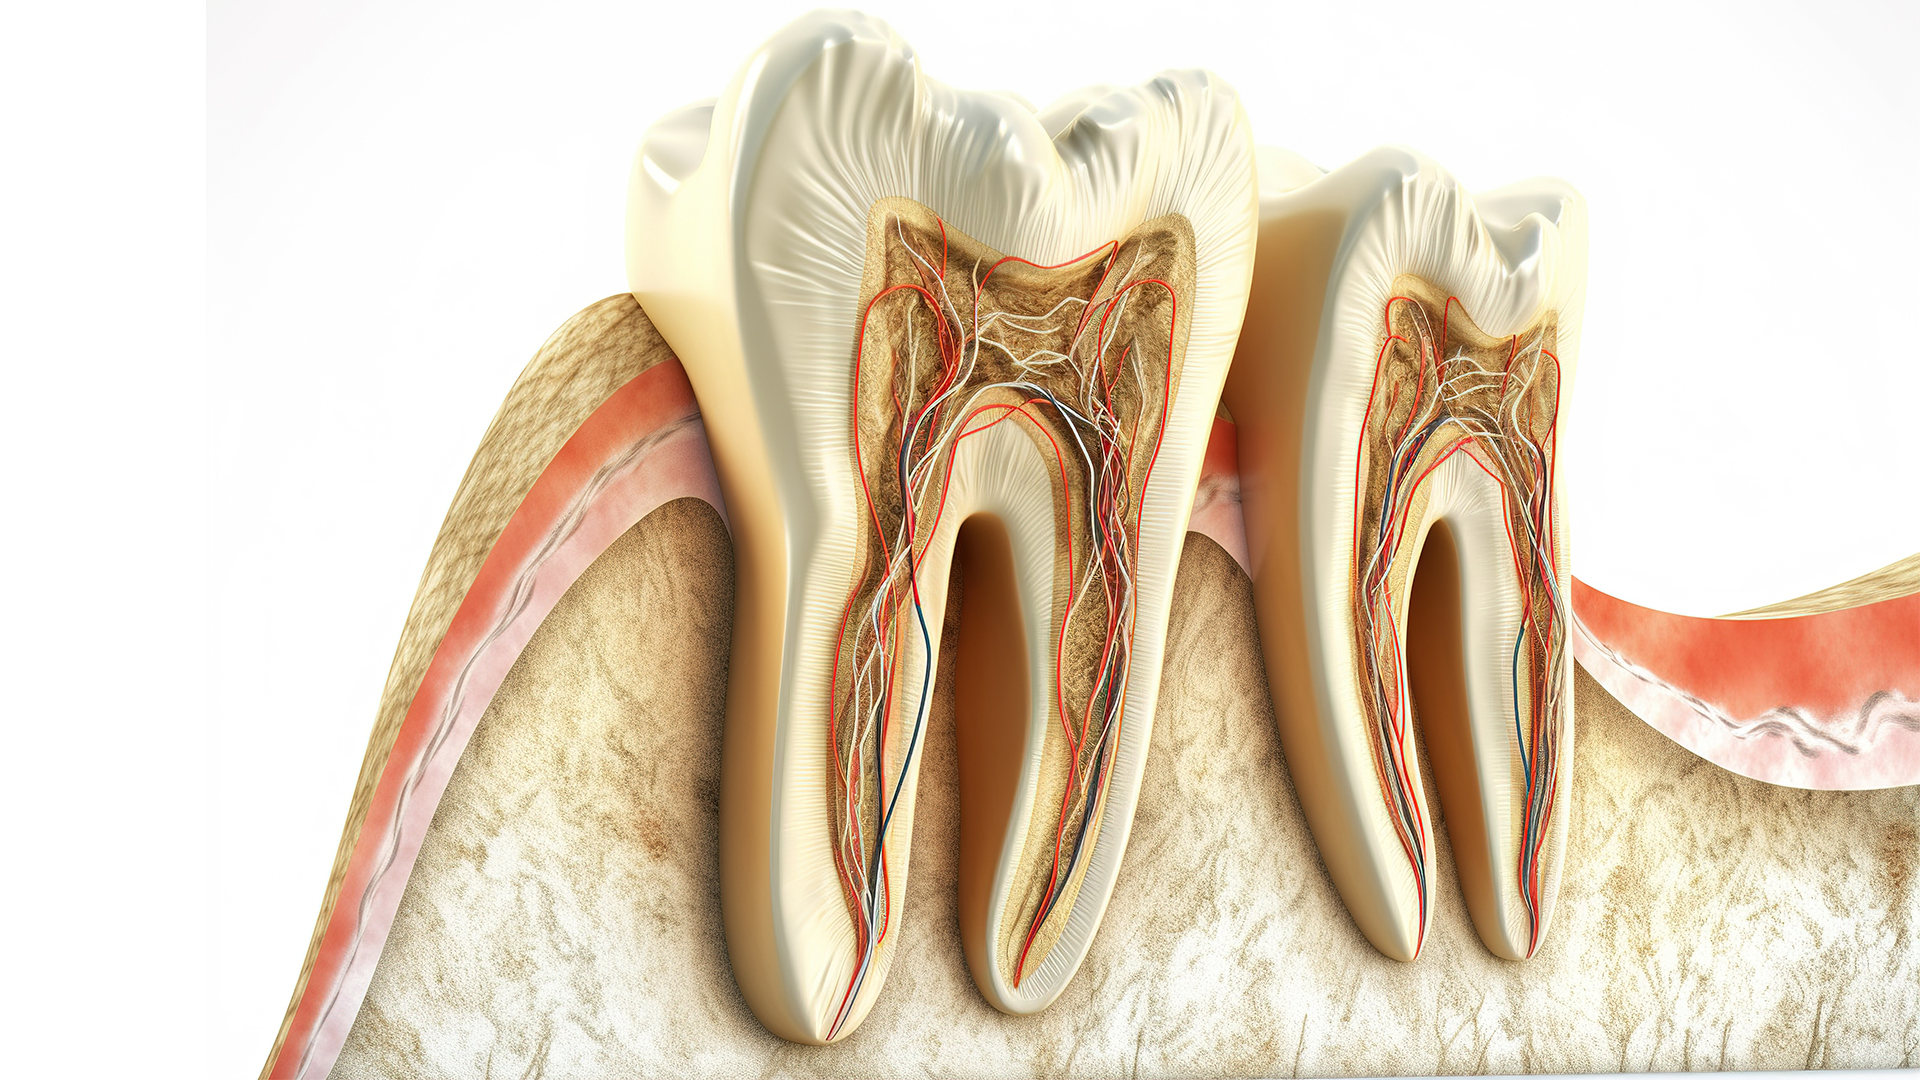 Root Canal Treatments